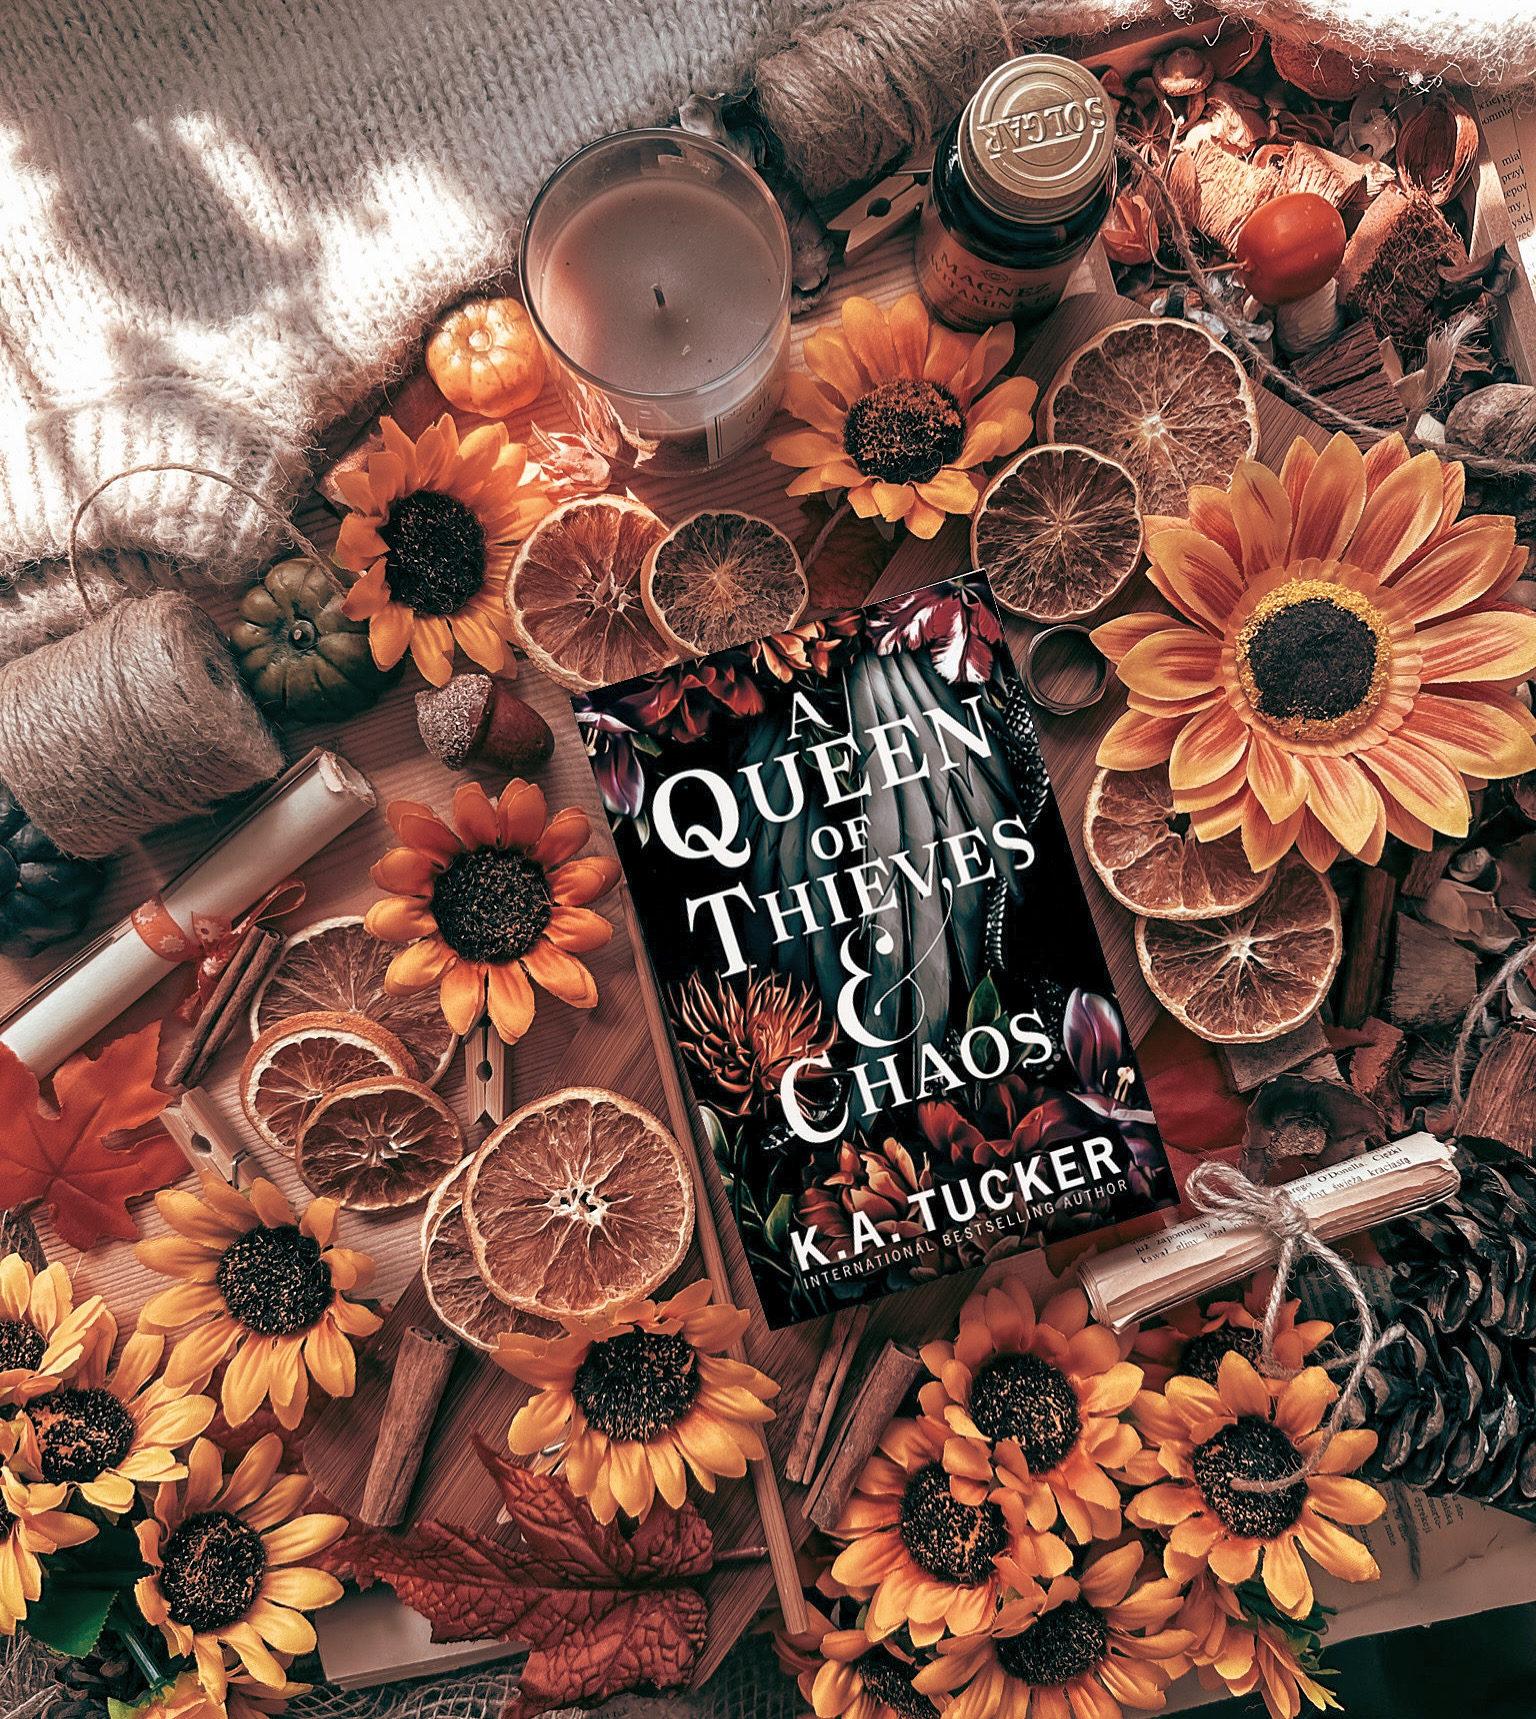 A Queen of Thieves & Chaos Book Review